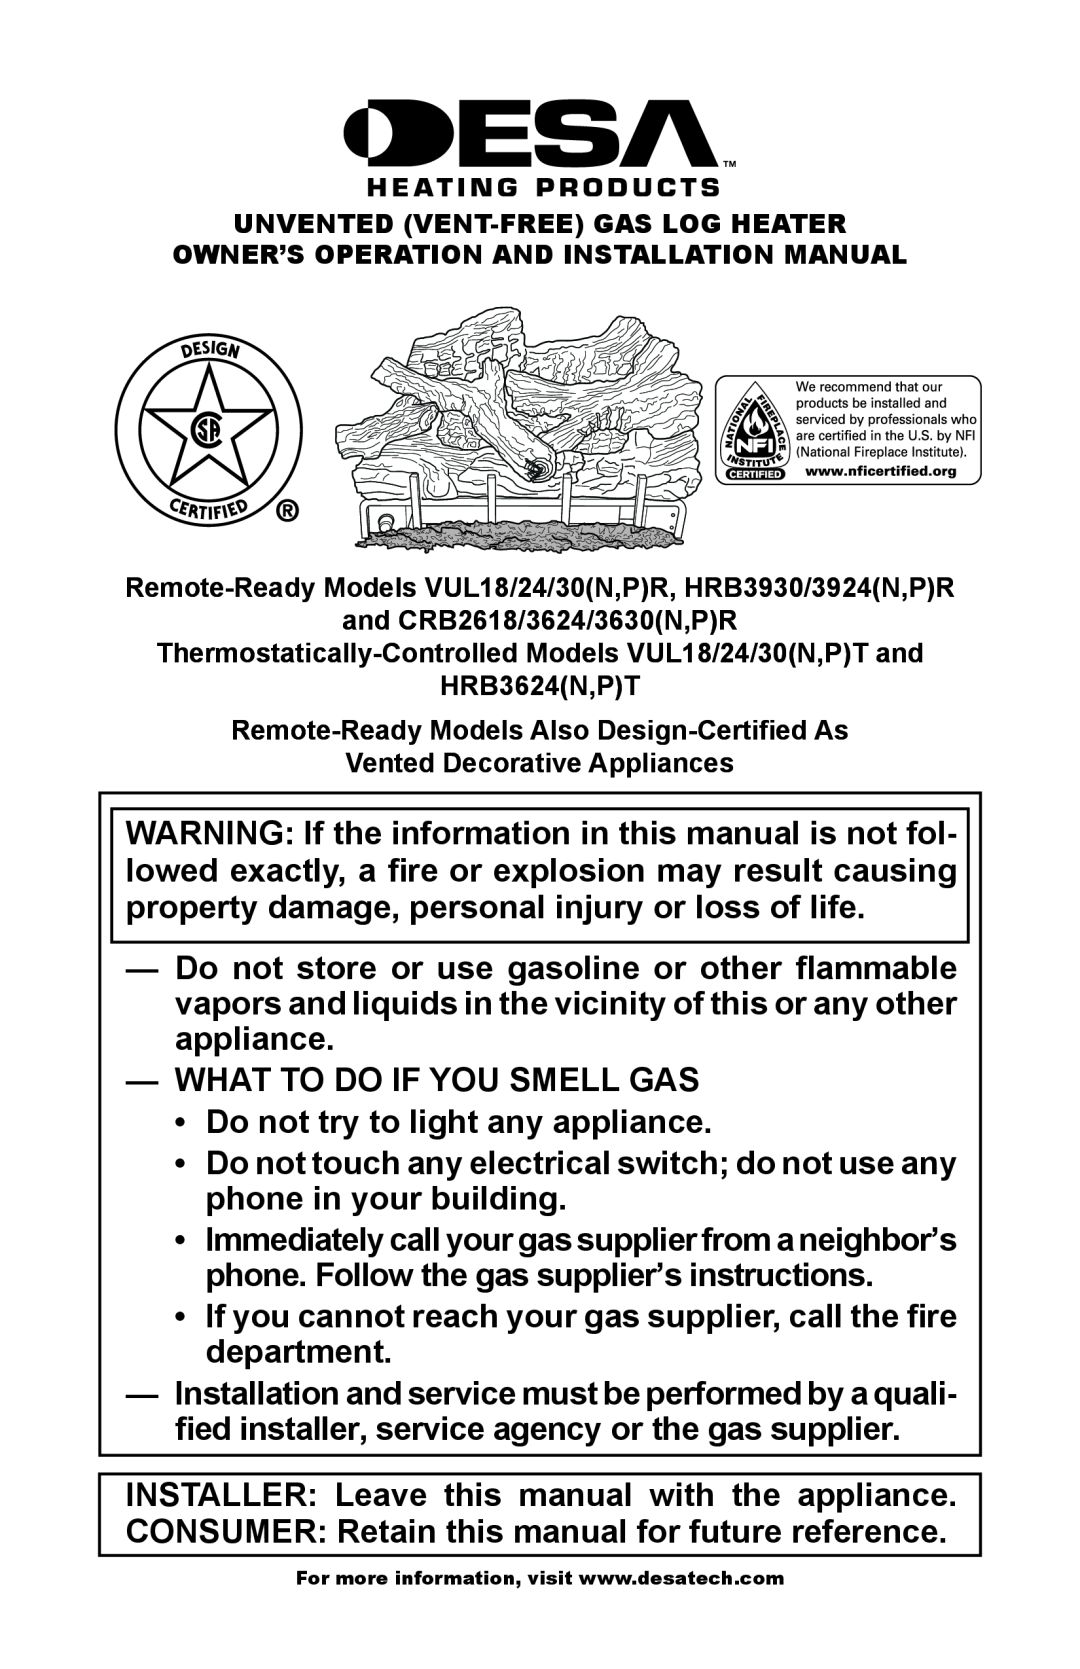 Desa P)R, P)T, HRB3624, HRB3930/3924, VUL18, VUL24, VUL30 installation manual What To Do If You Smell Gas 